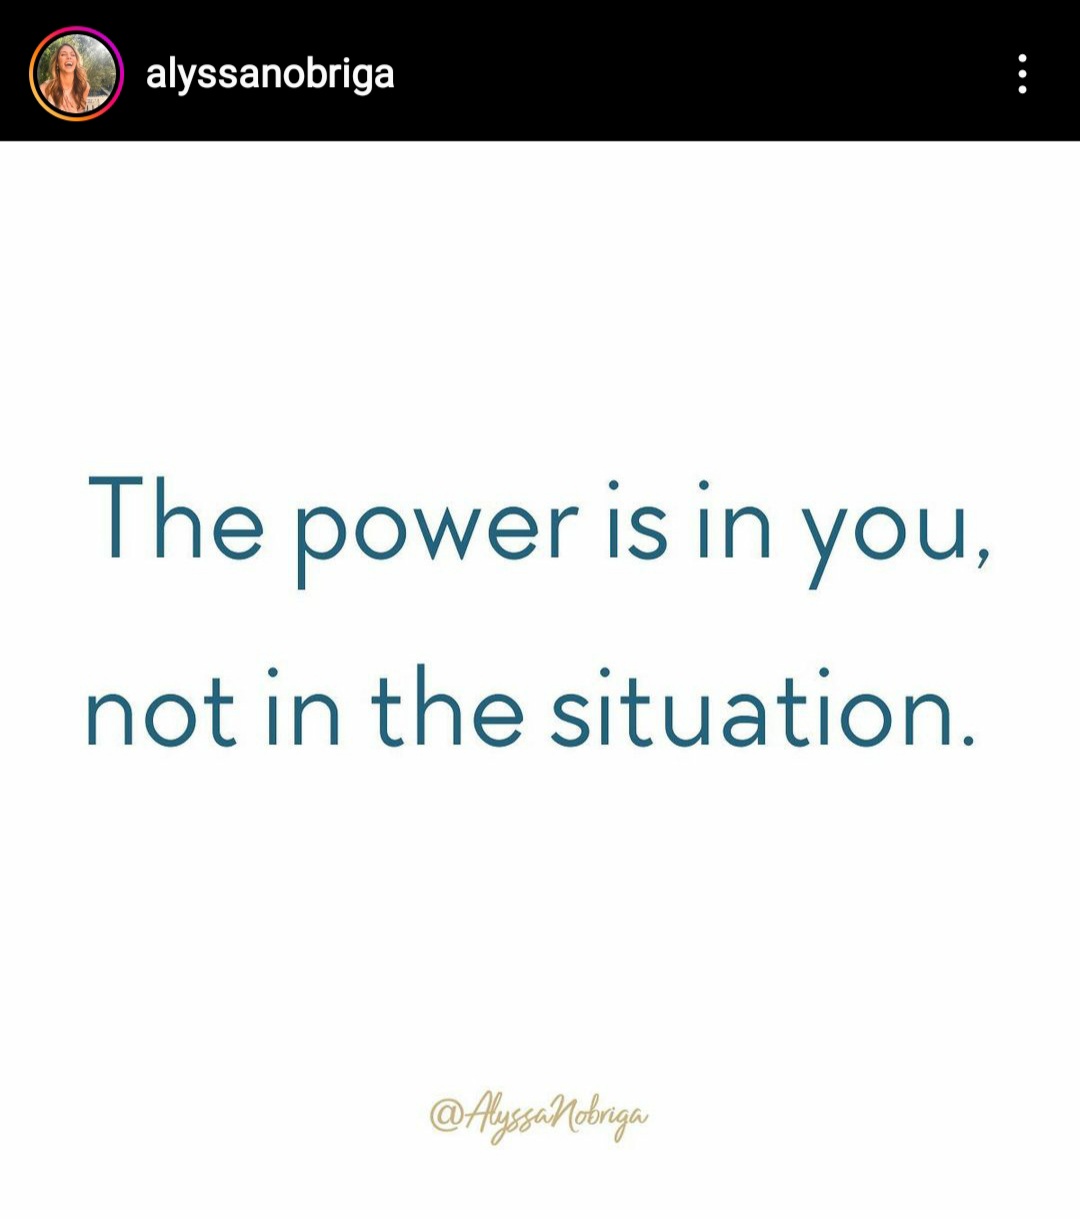 The power is in you, not in the situation. Alyssa Nobriga, coaching tip